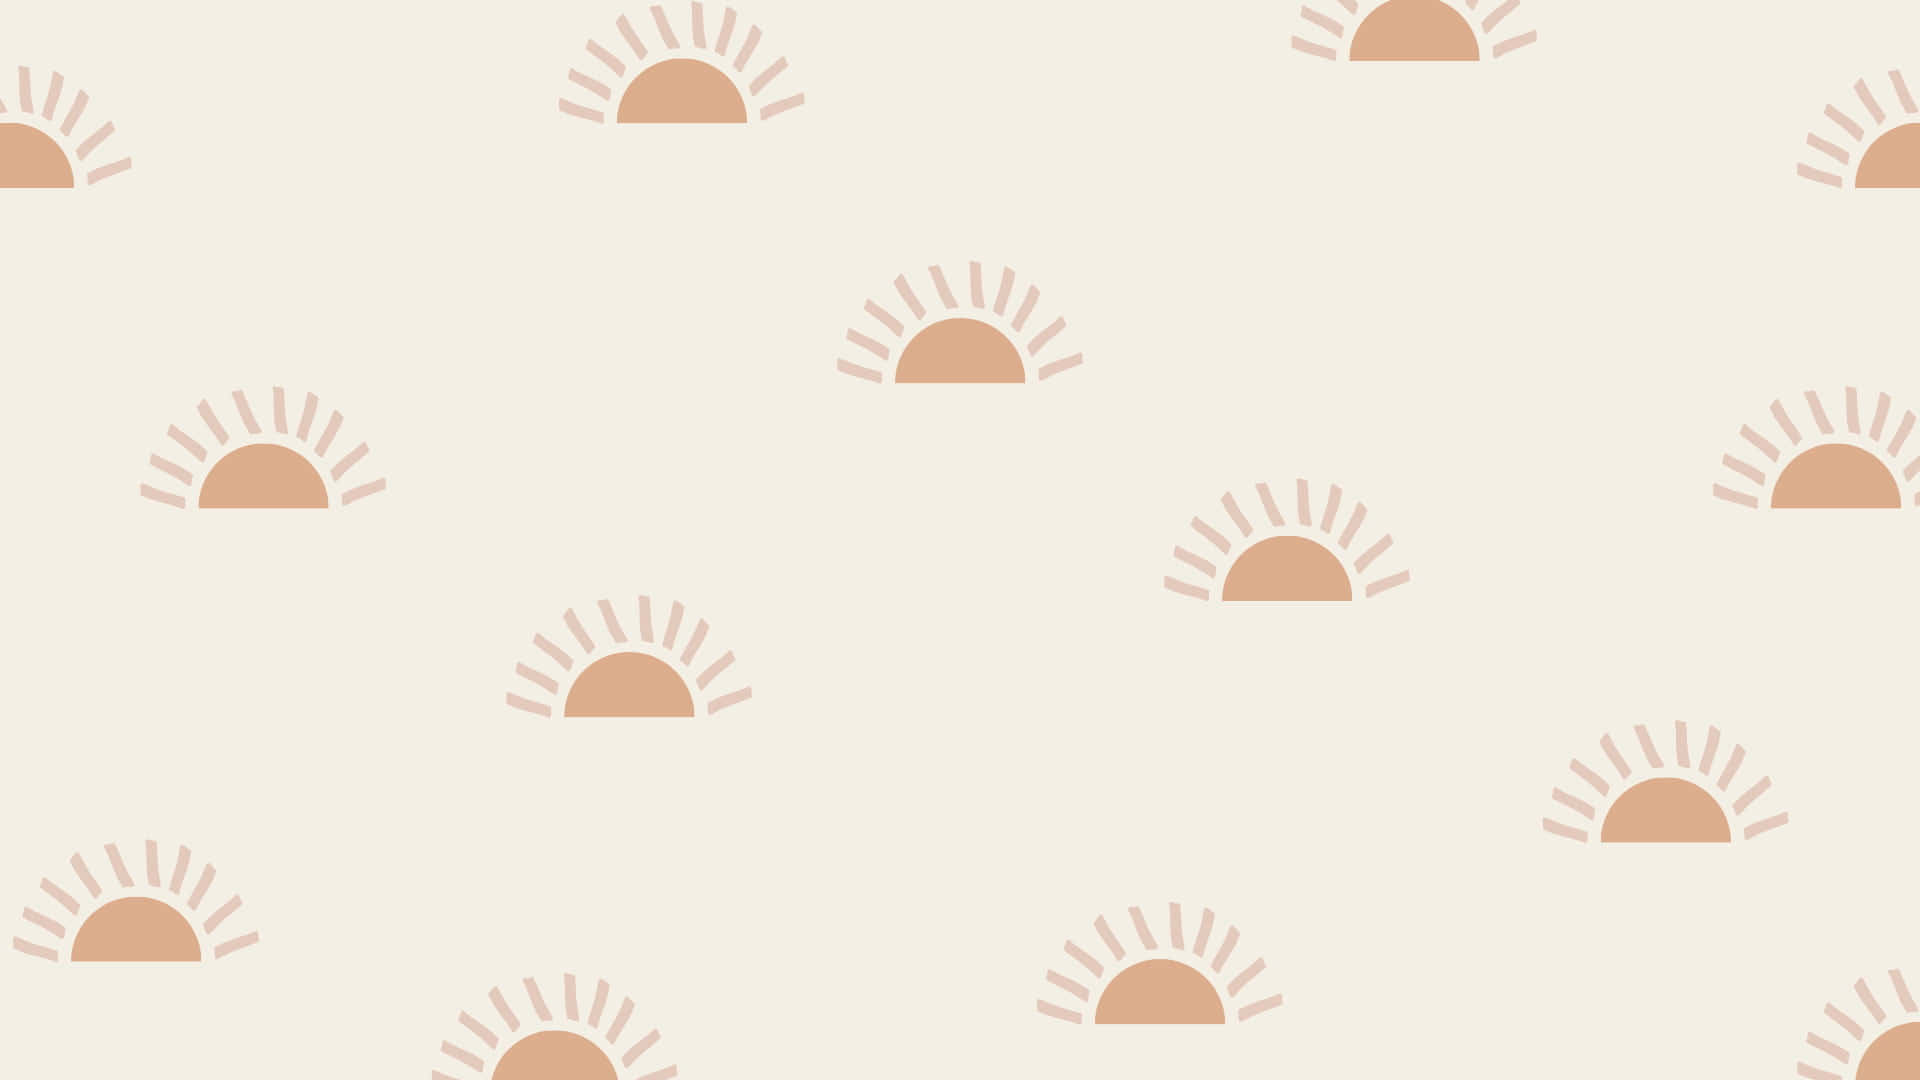 A Pattern Of Suns And Sunspots On A Beige Background Wallpaper